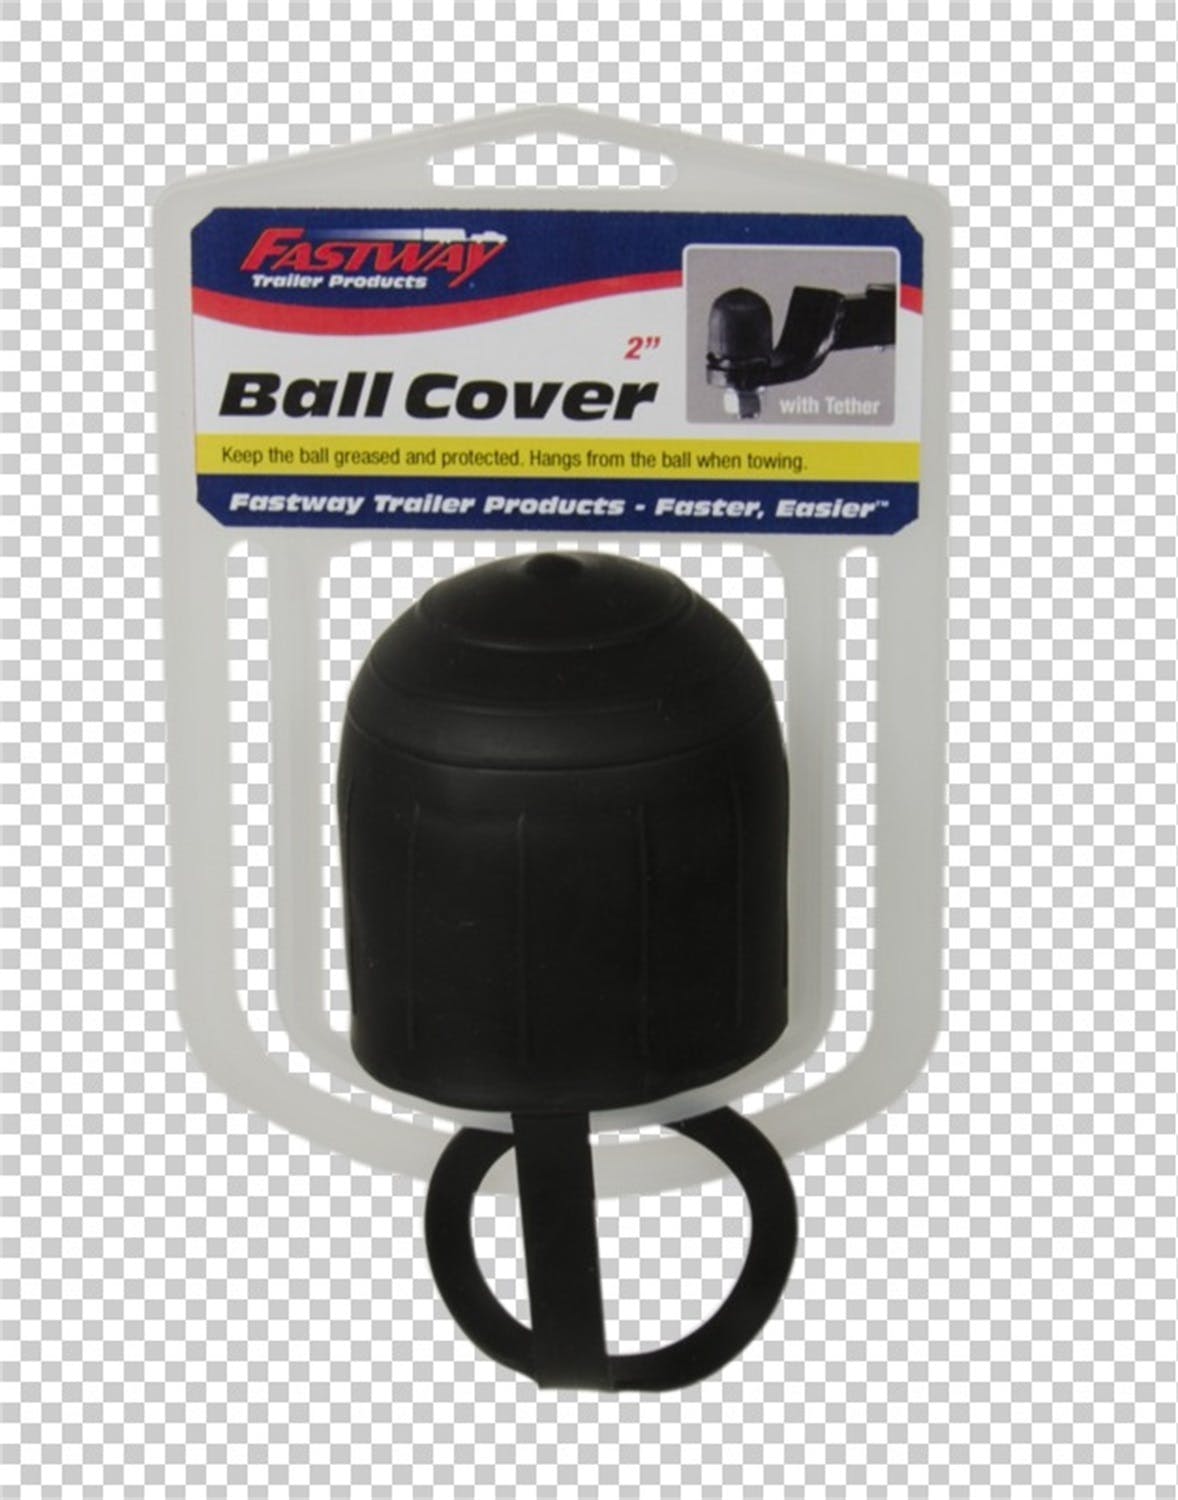 Fastway 82-00-3220 2in Ball Cover with Tether Retail